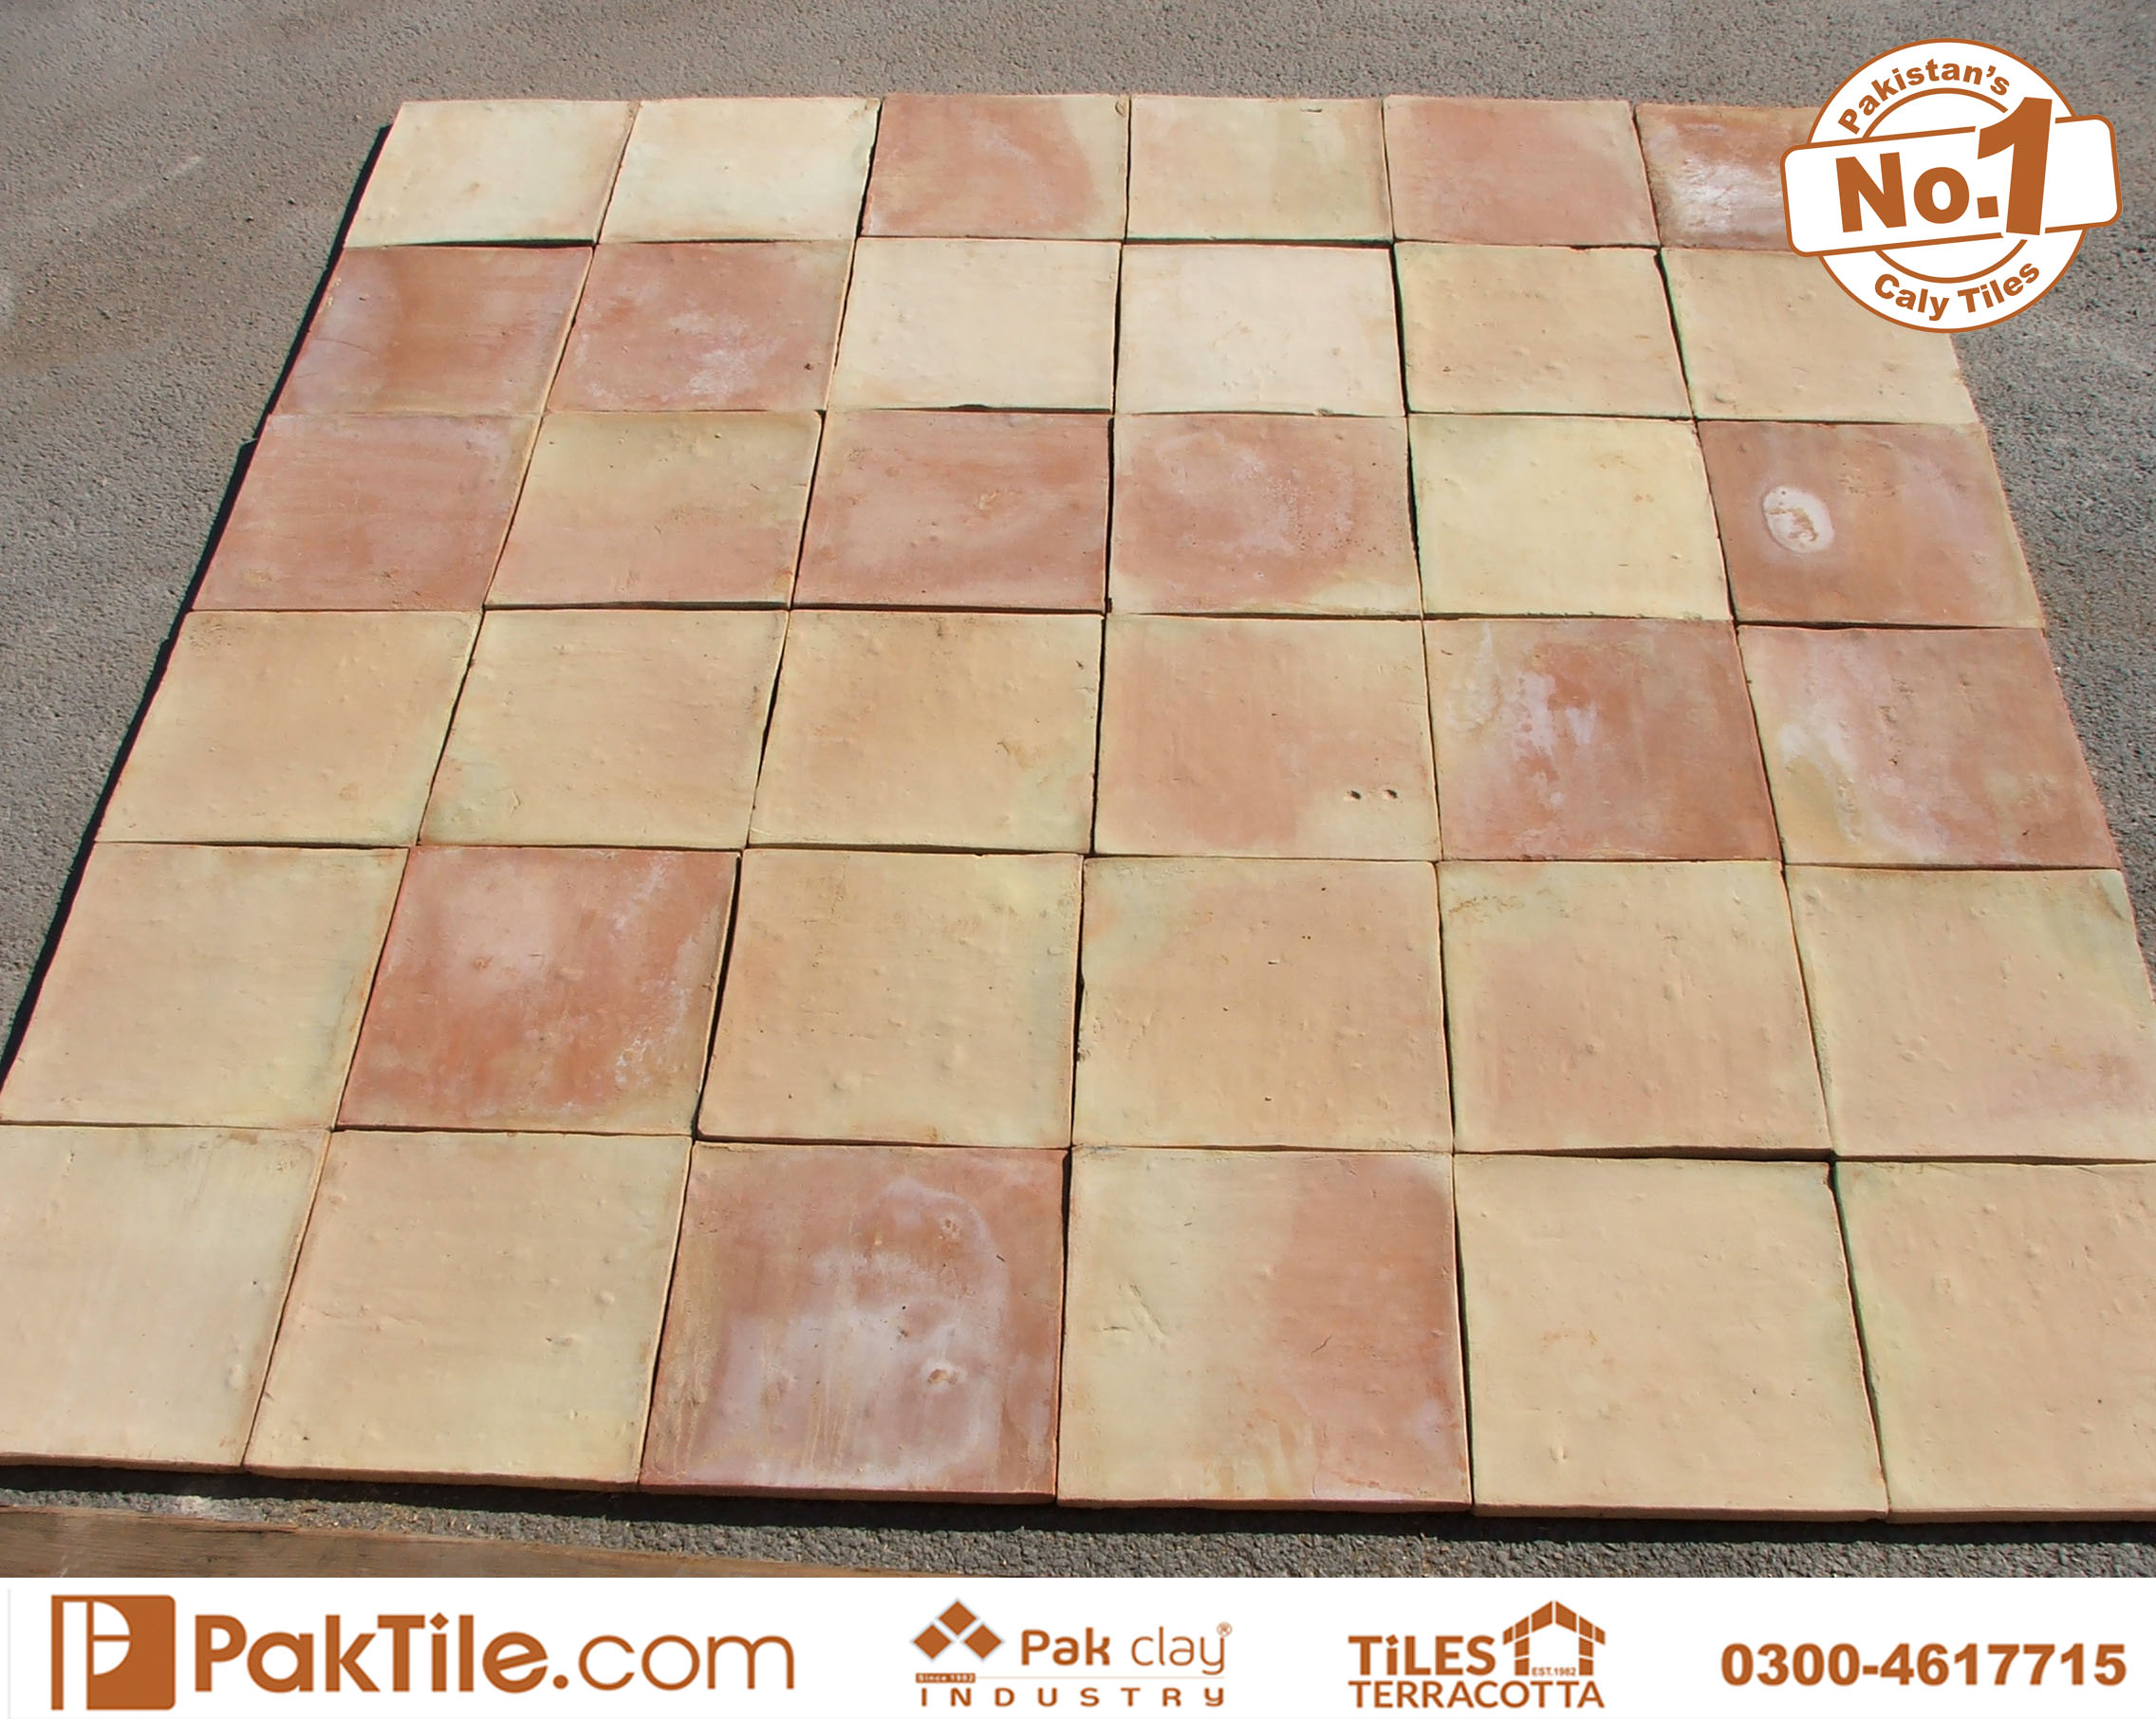 2 Eco Friendly Natural Terracotta Bathroom Wall Tiles Design Price Pakistan Images